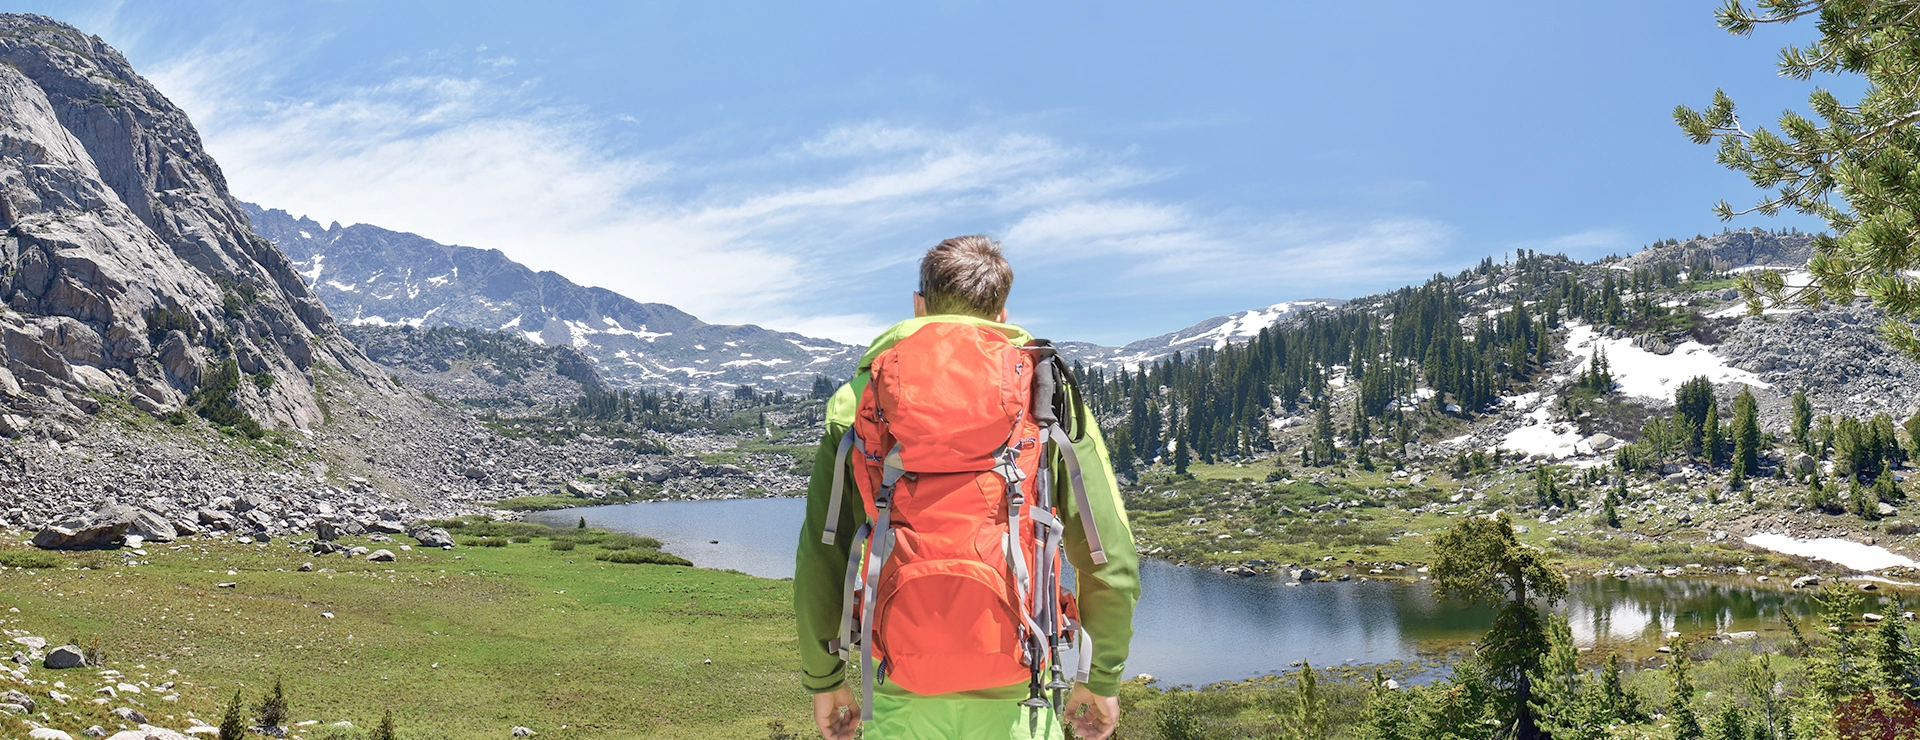 Hiking use case banner - without